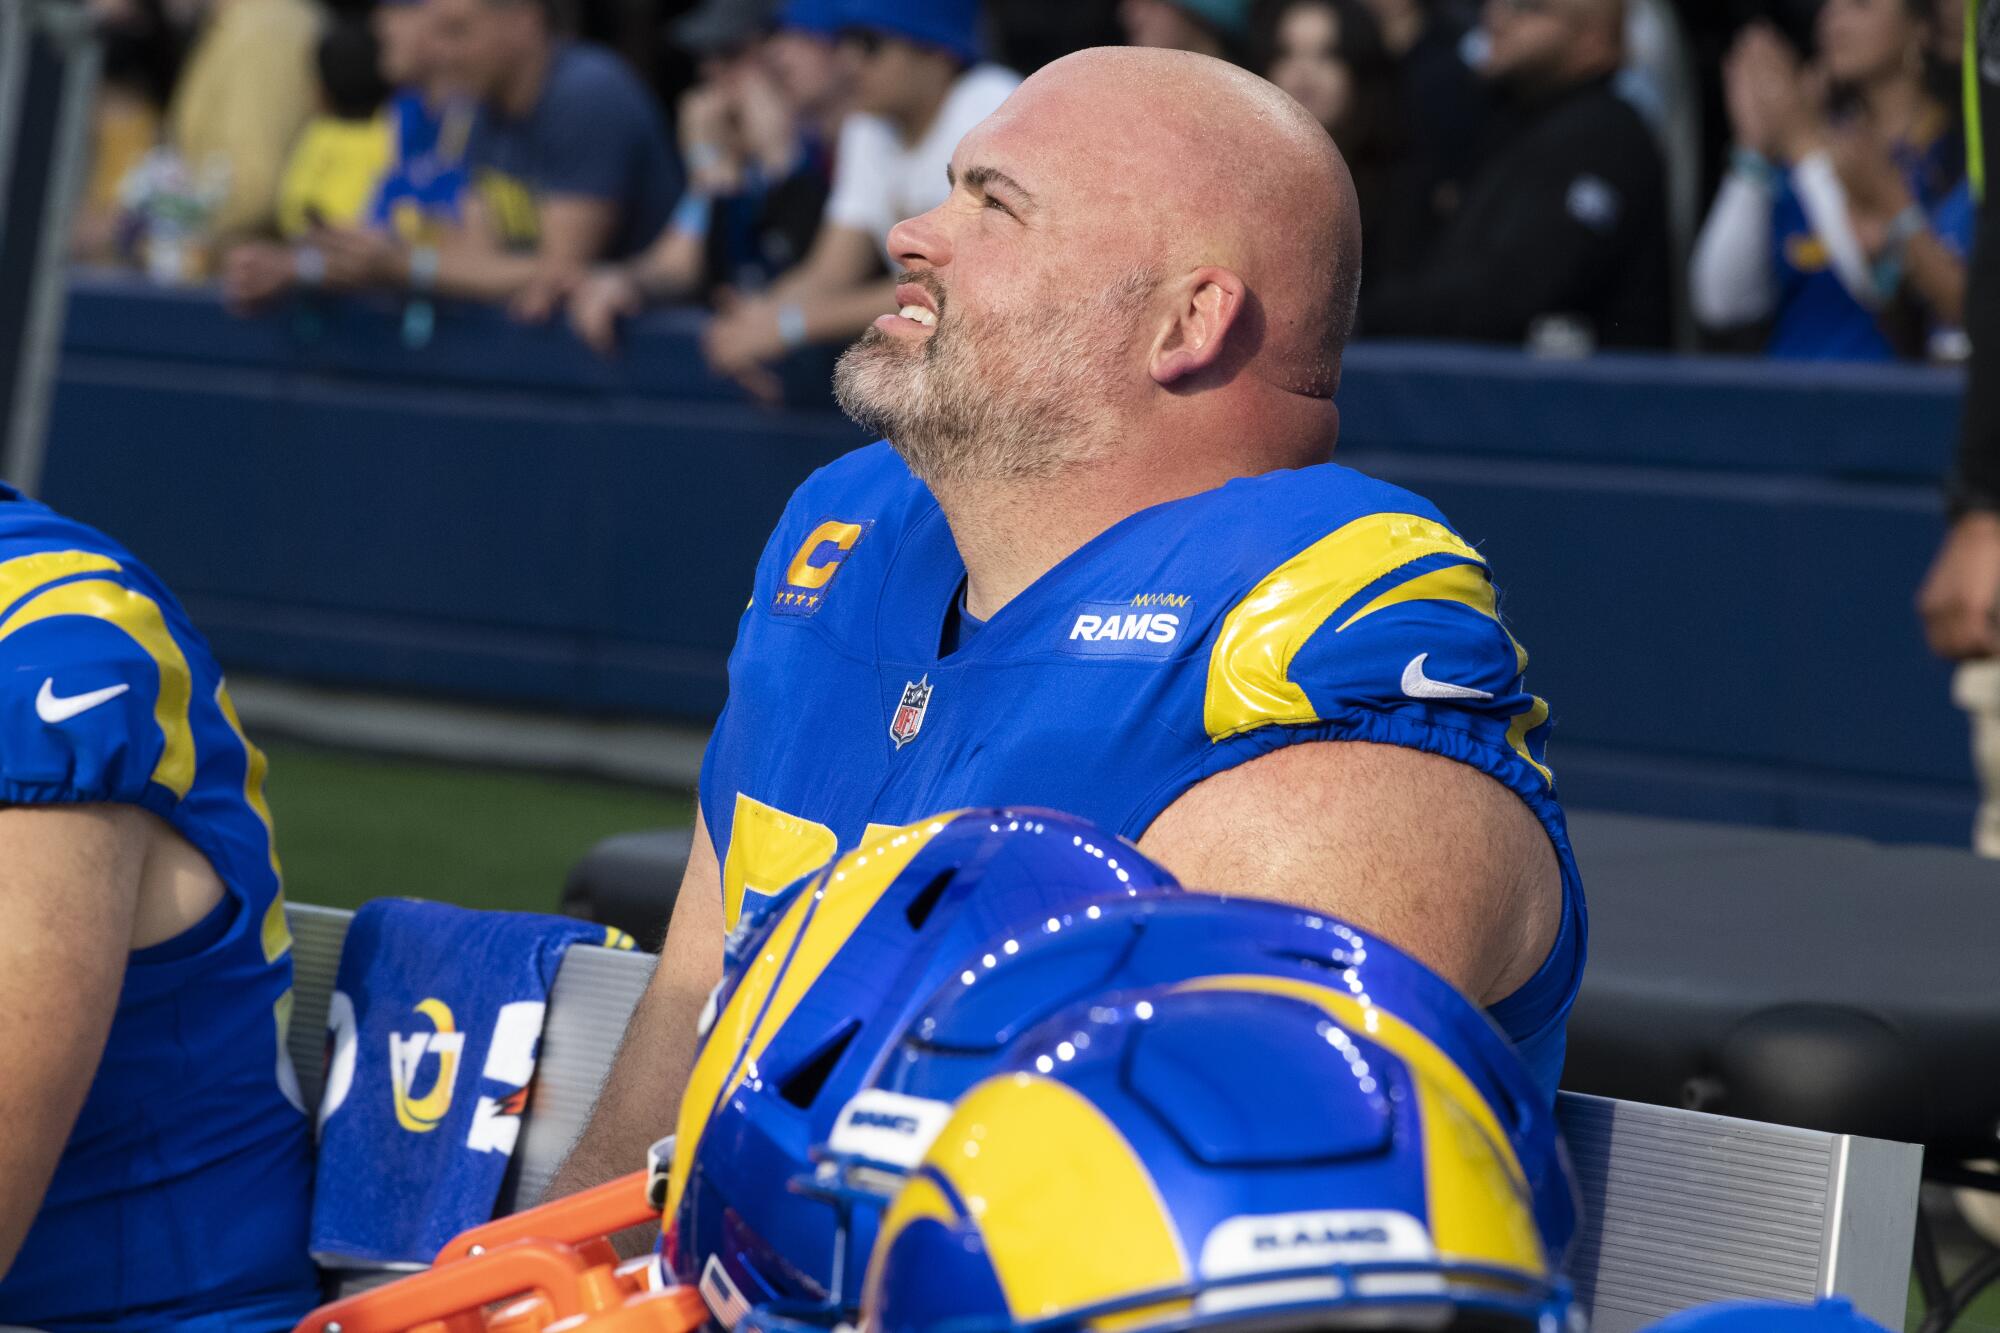 Andrew Whitworth looks up at the scoreboard while catching his breath between series.